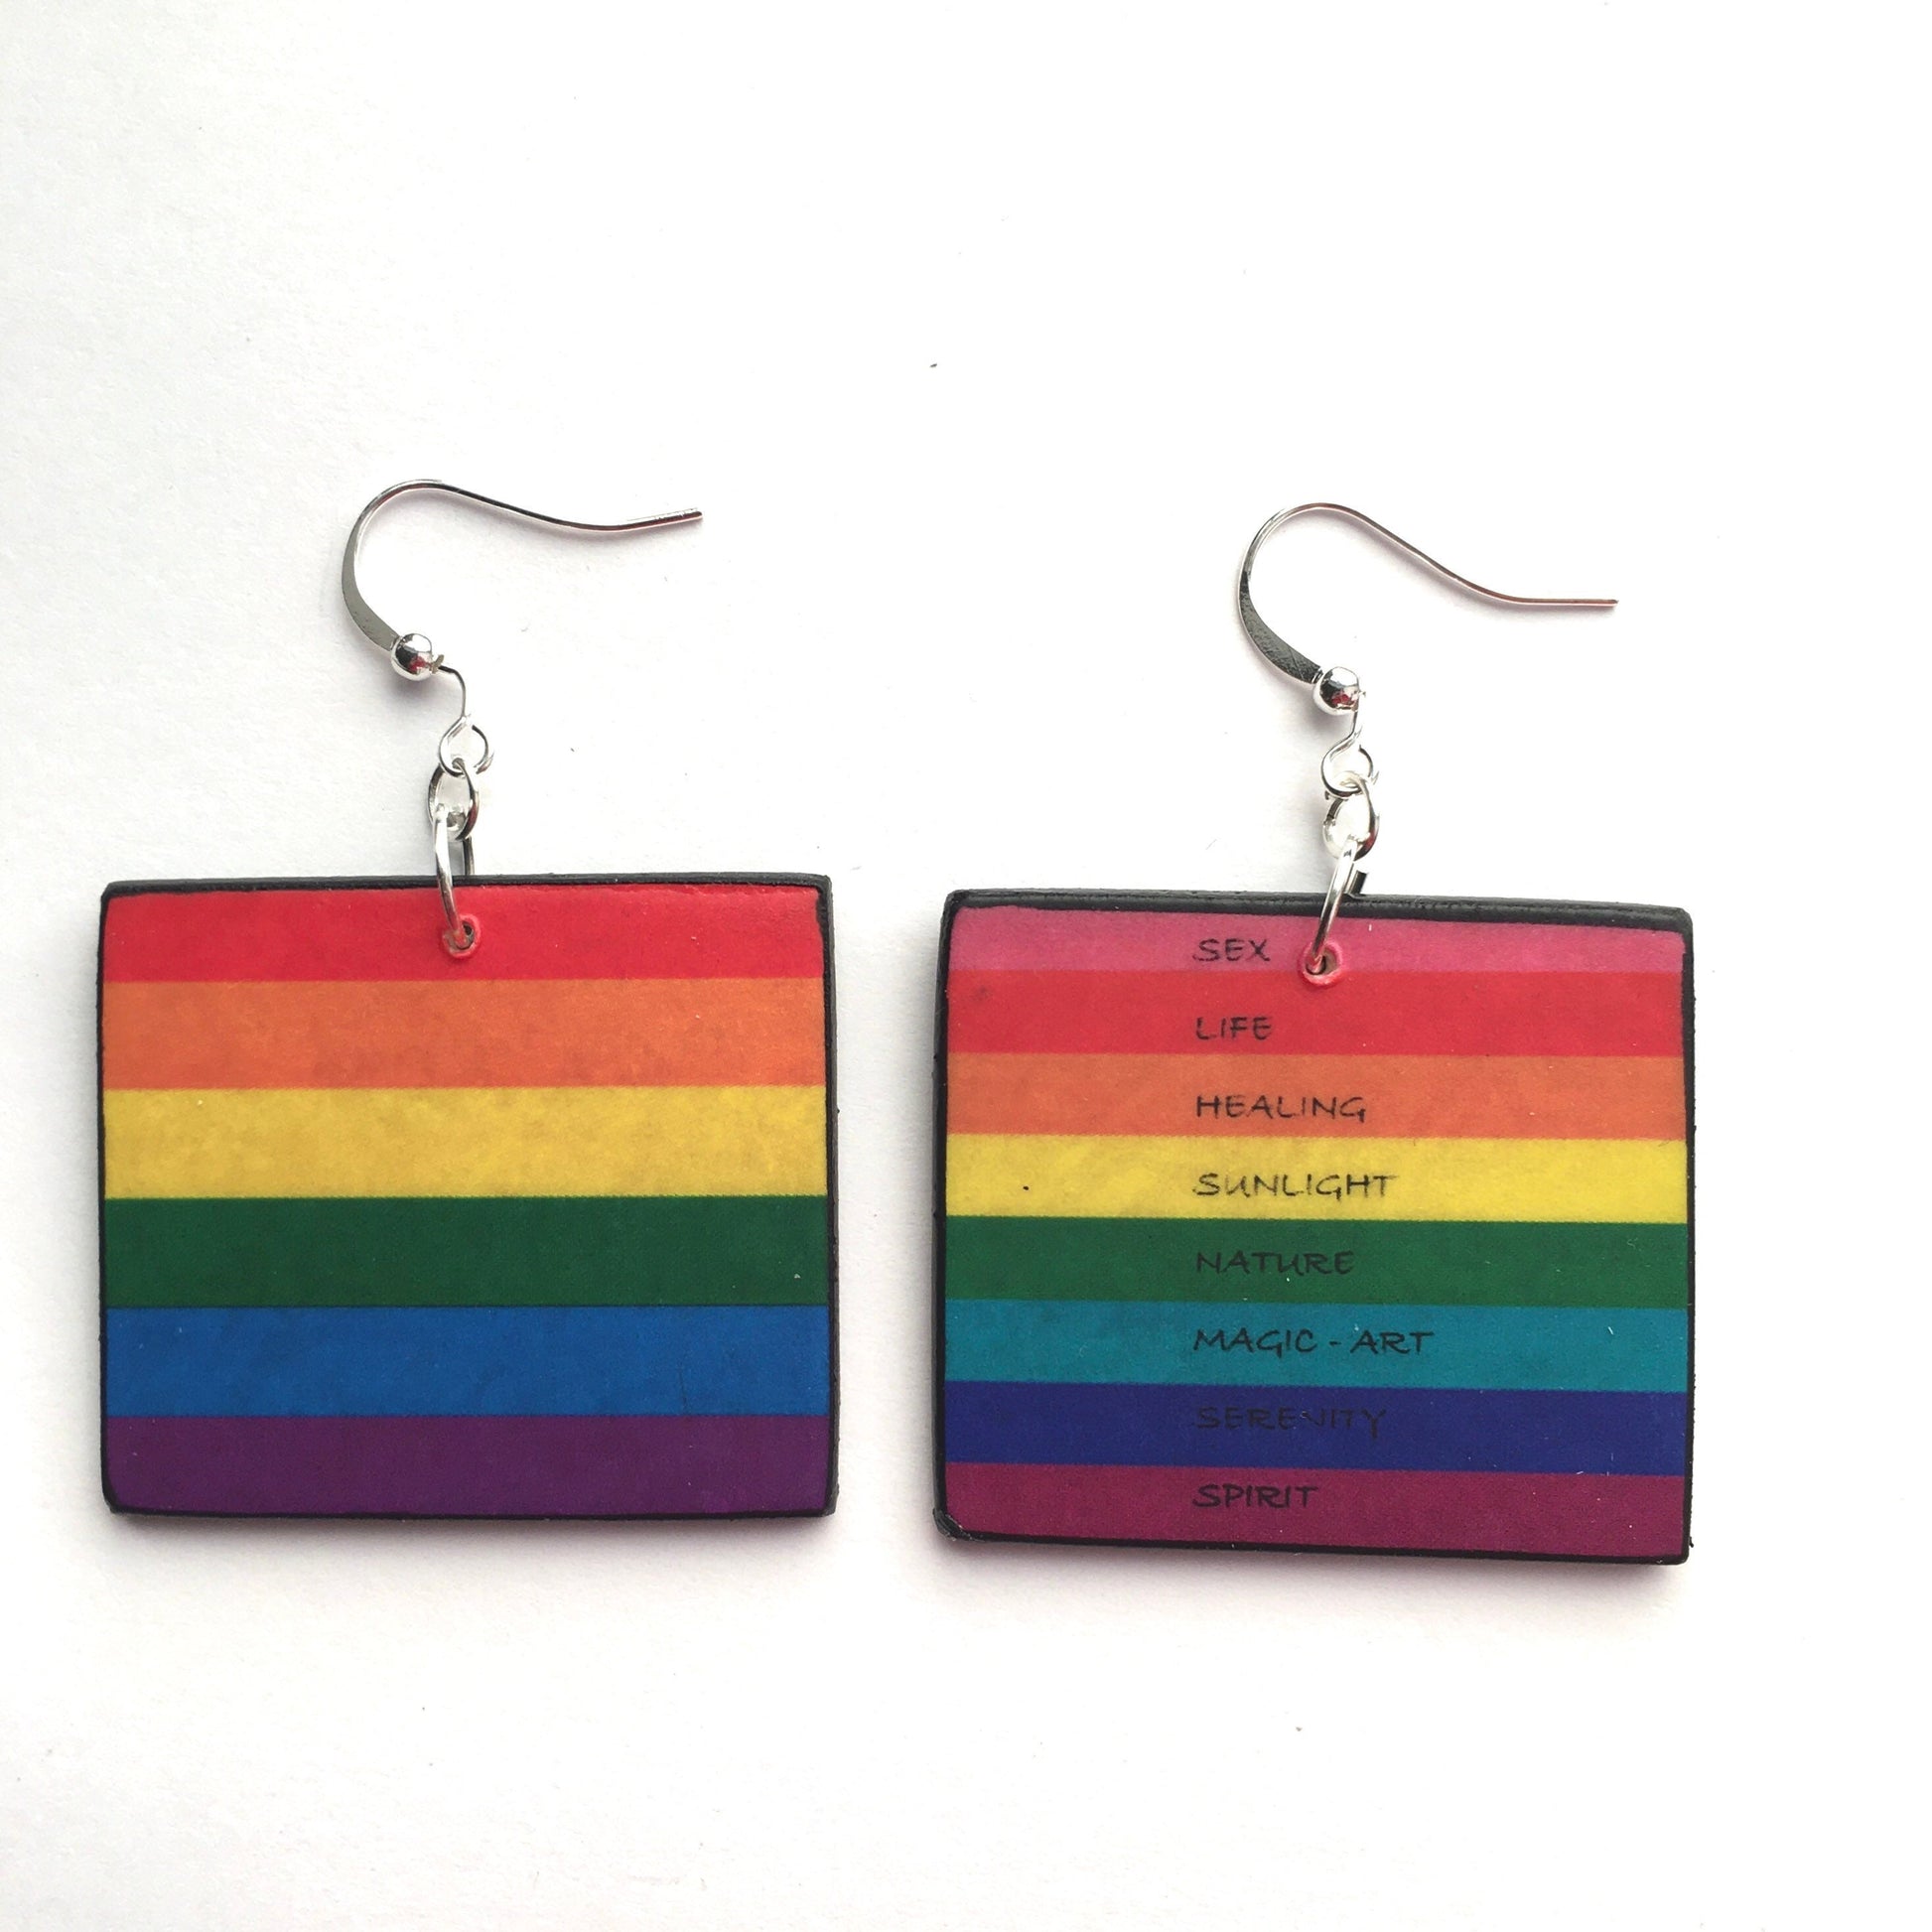 LGBT flag art wooden and plated silver hooks earrings handmade by Obljewellery, aesthetic, artsy gift. Statement, coloured earrings, one with eight-stripe version designed by Gilbert Baker 